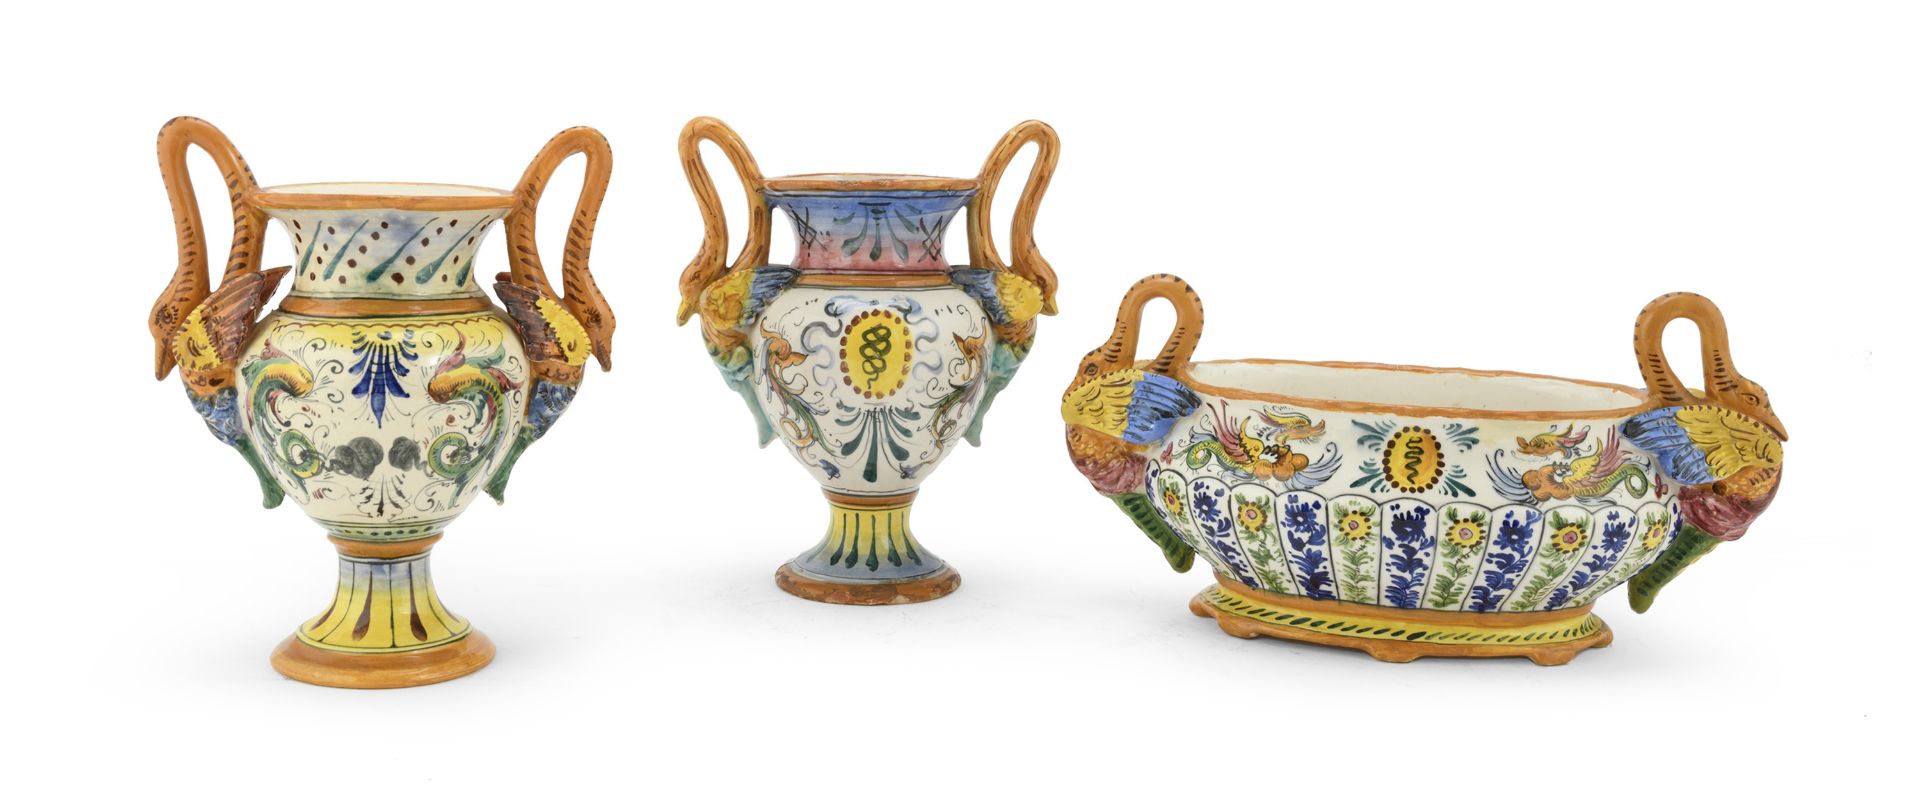 A BOWL AND TWO VASES IN CERAMIC ZACCAGNINI EARLY 20TH CENTURY